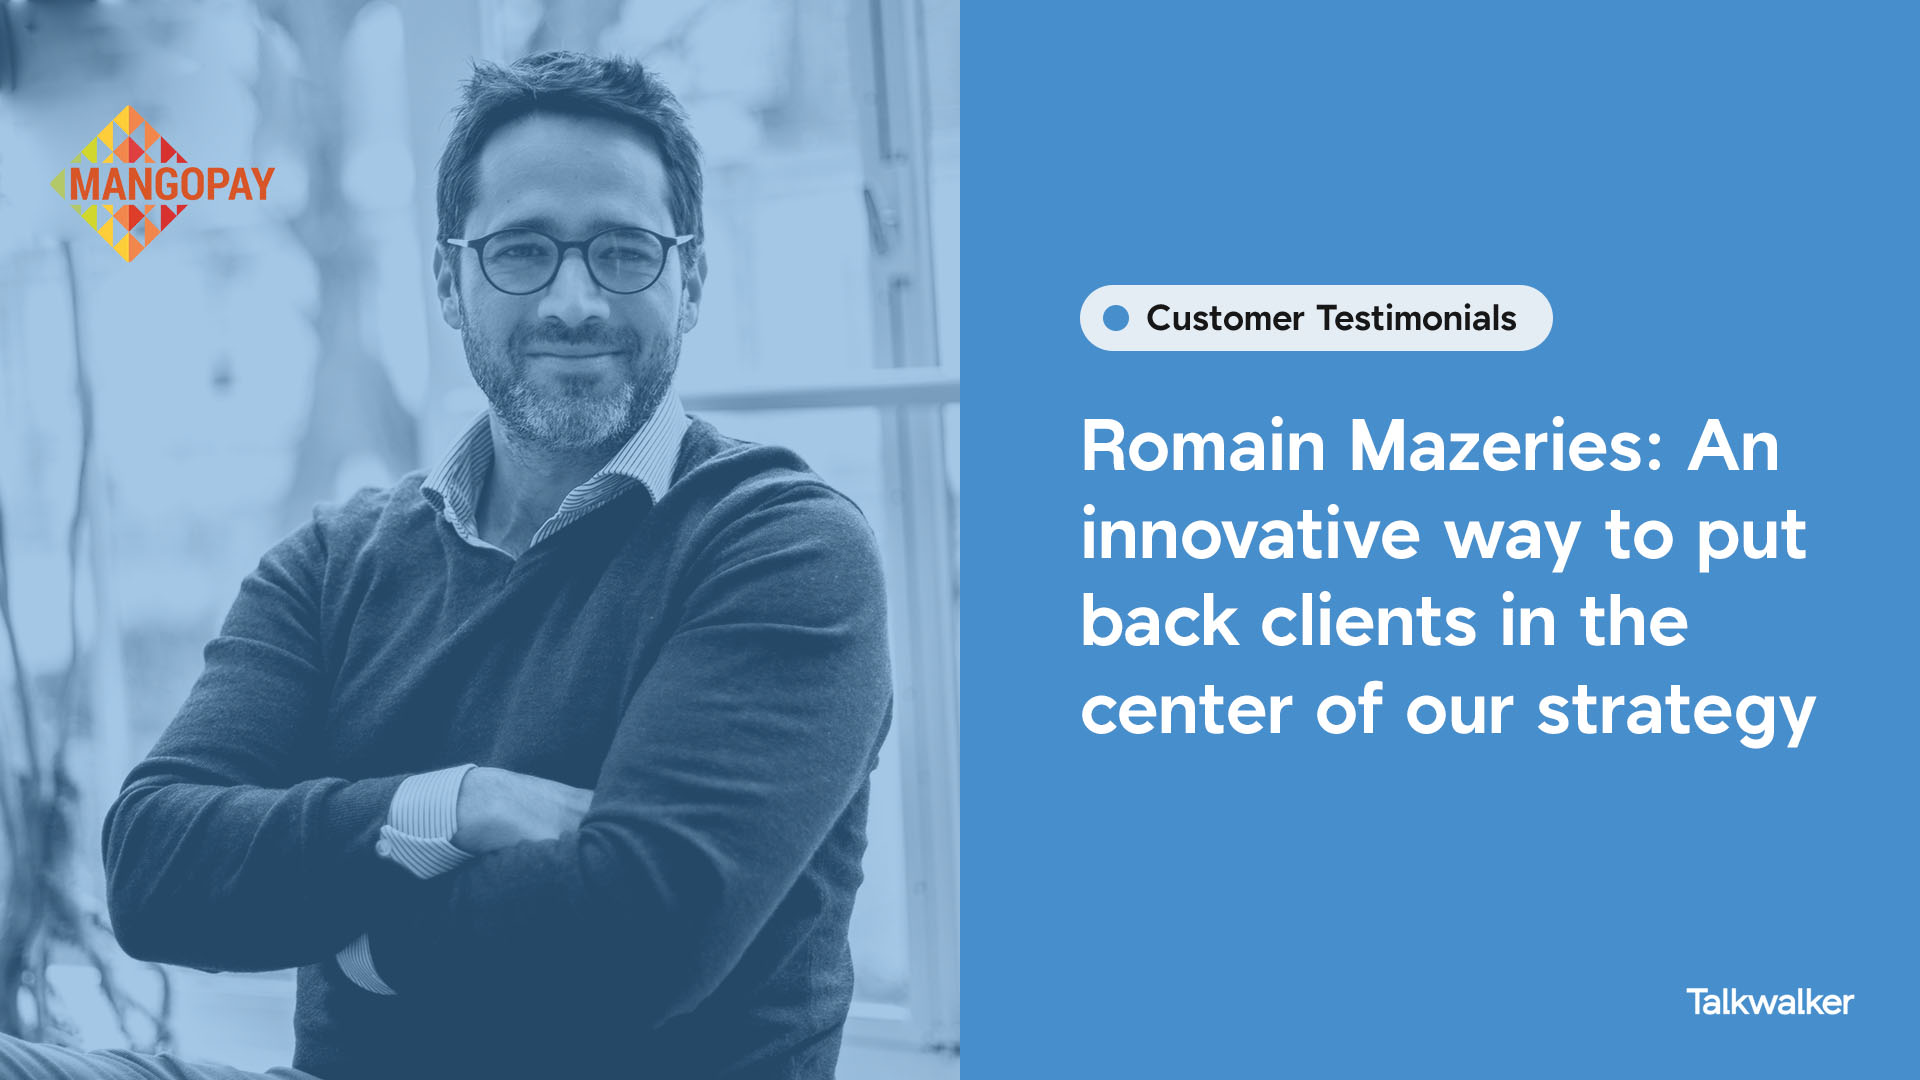 Romain Mazeries: An innovative way to put back clients in the center of our strategy